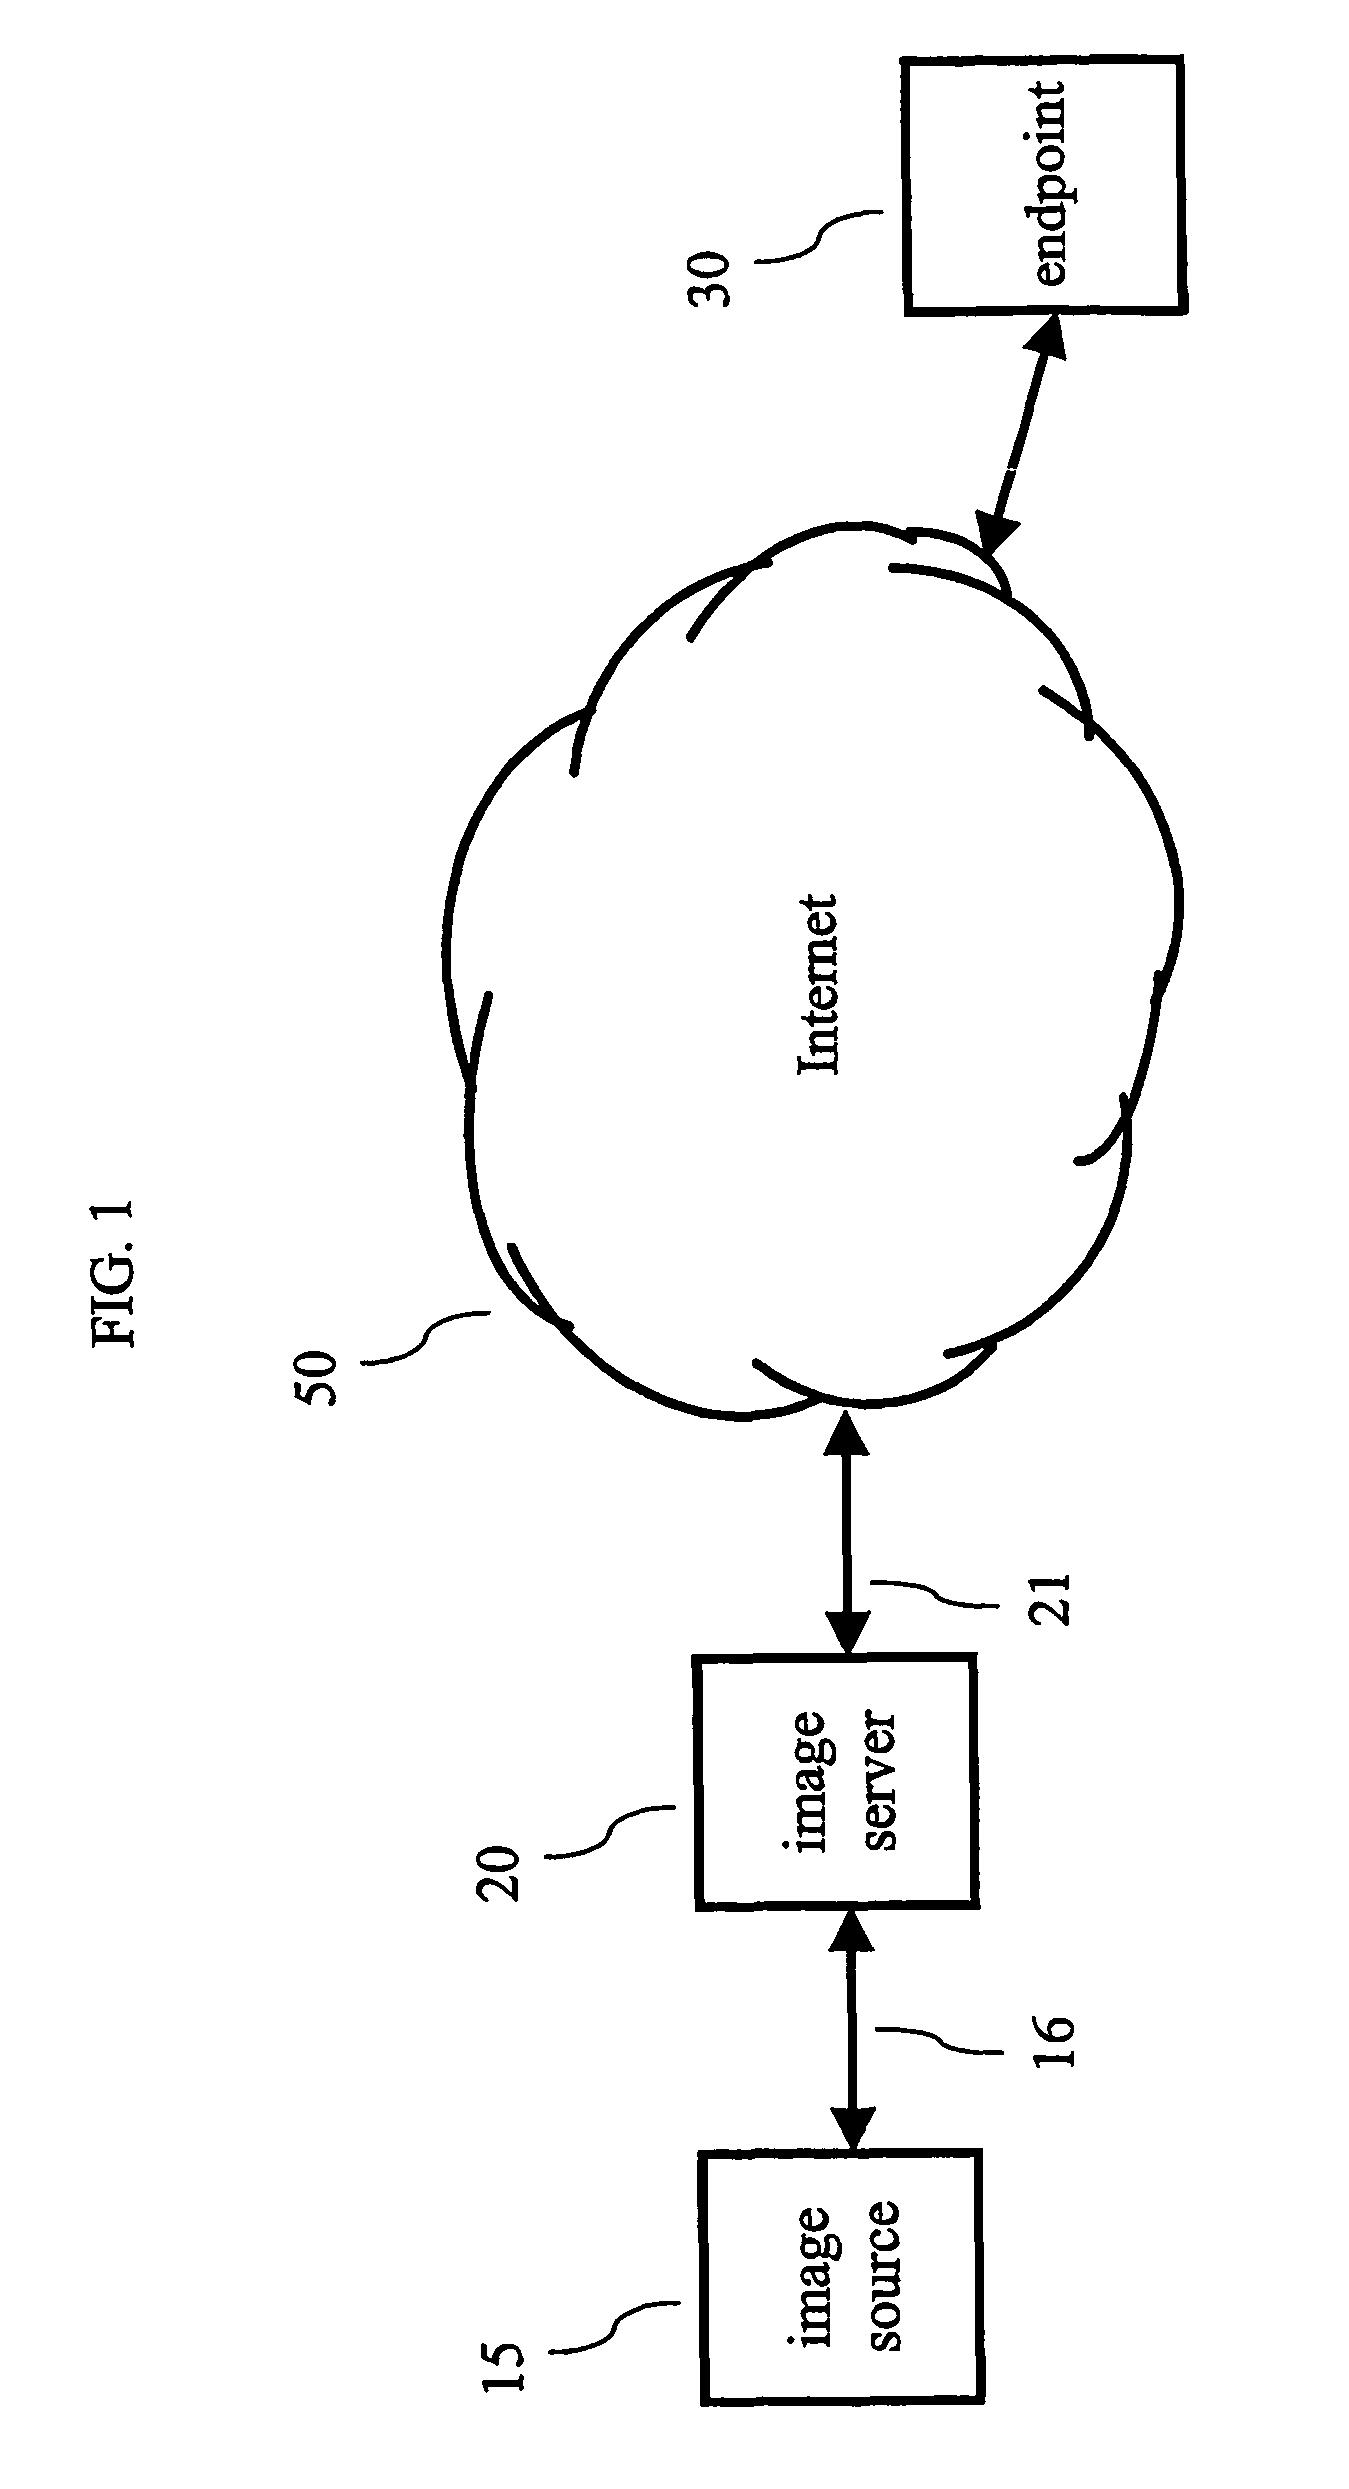 Apparatus and method for reducing noise in an image